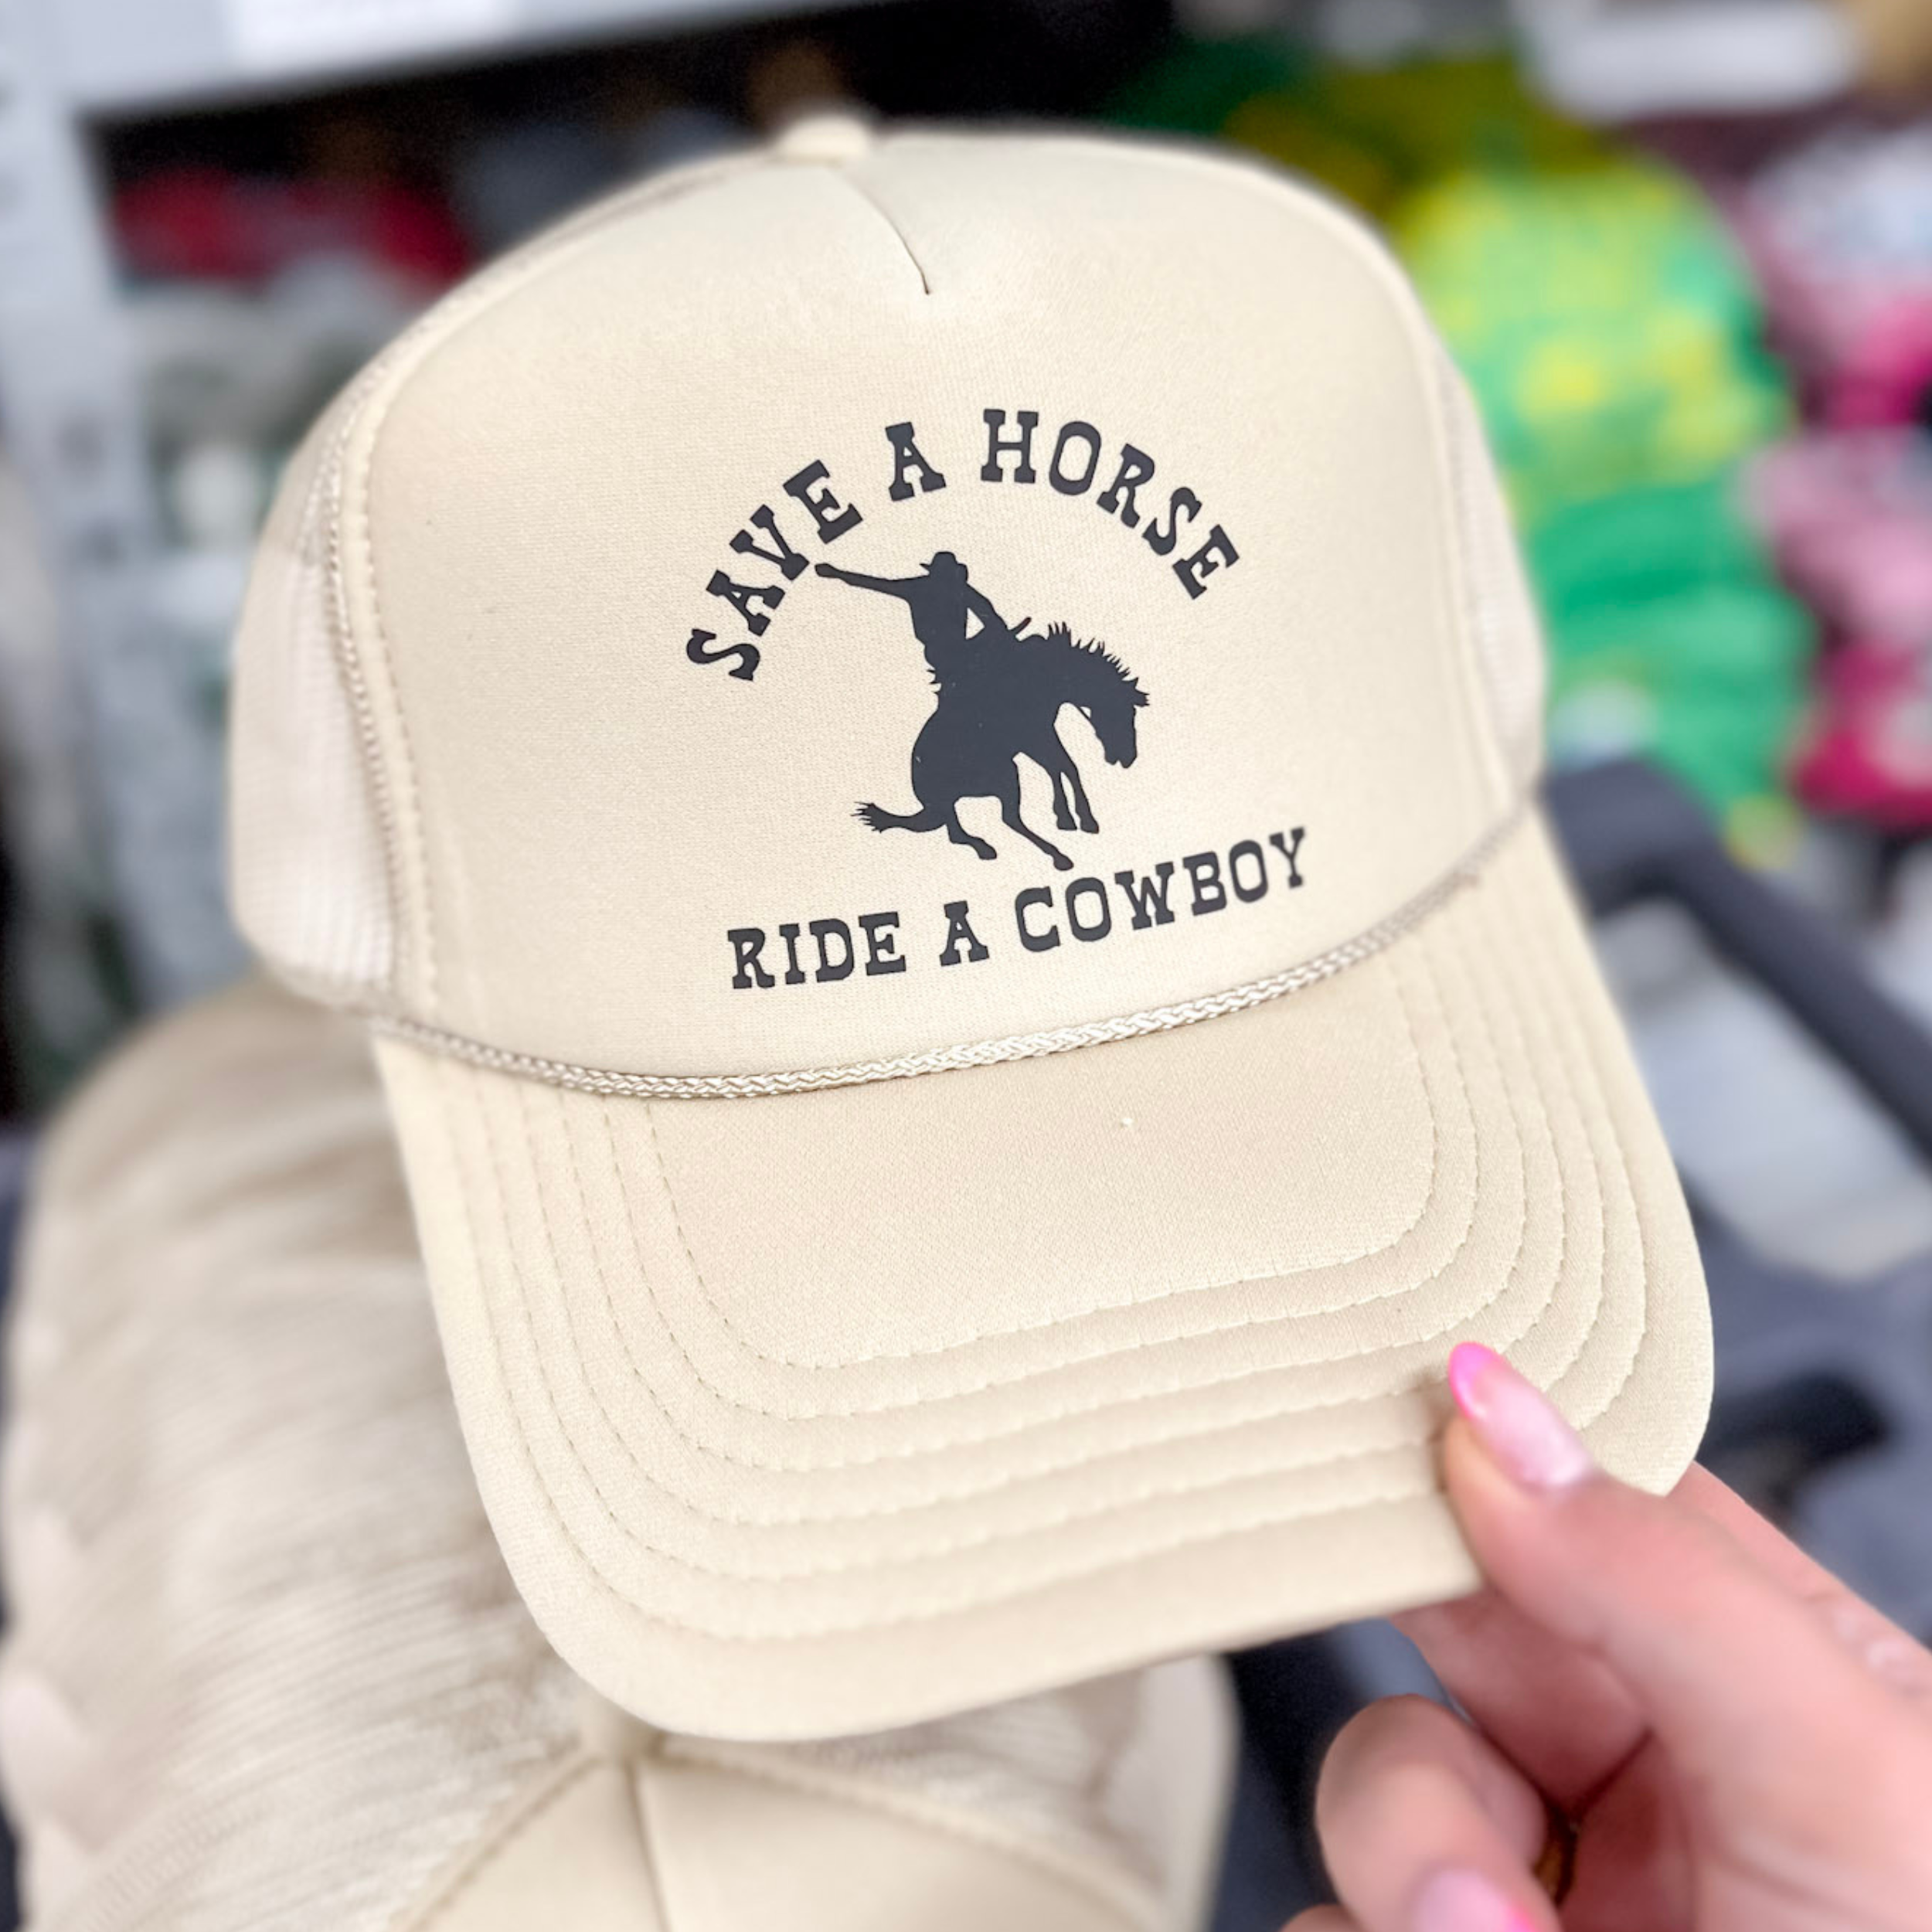 Save a Horse Foam Ride A Cowboy Trucker Hat in Tan - Giddy Up Glamour Boutique